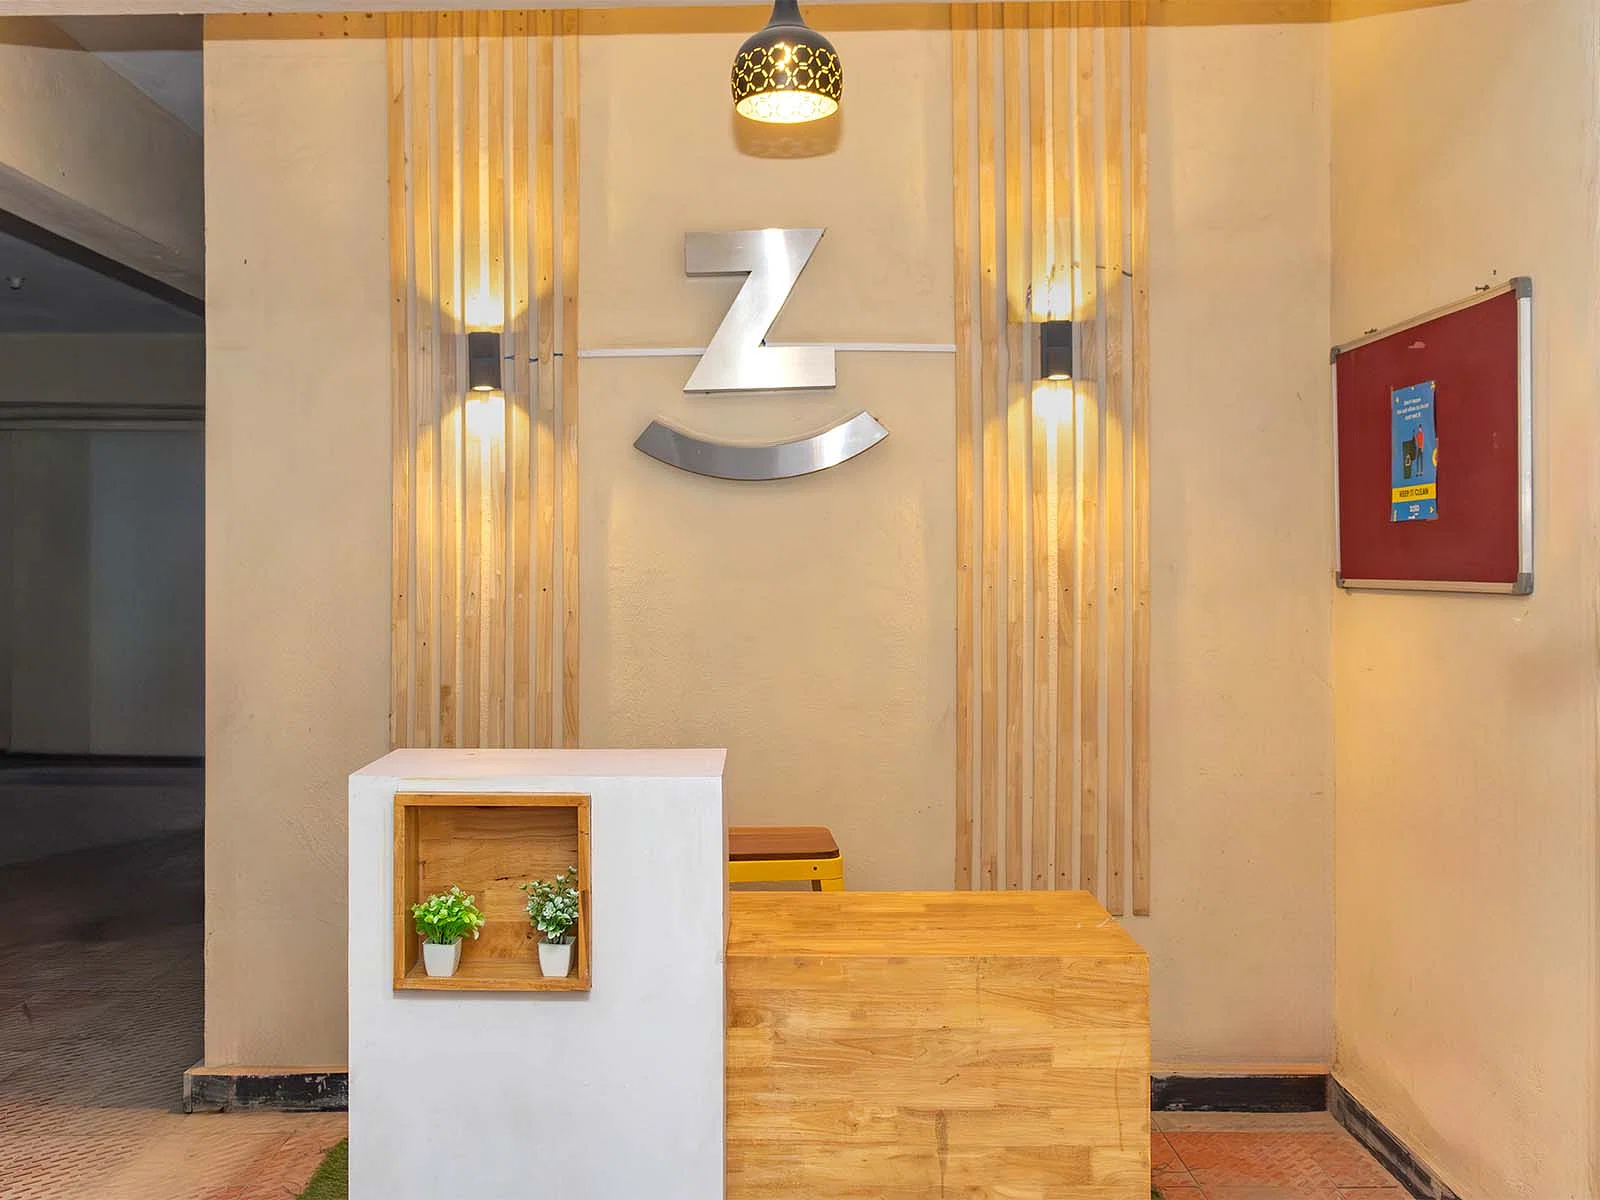 budget-friendly PGs and hostels for men and women with single rooms with daily hopusekeeping-Zolo Lotus